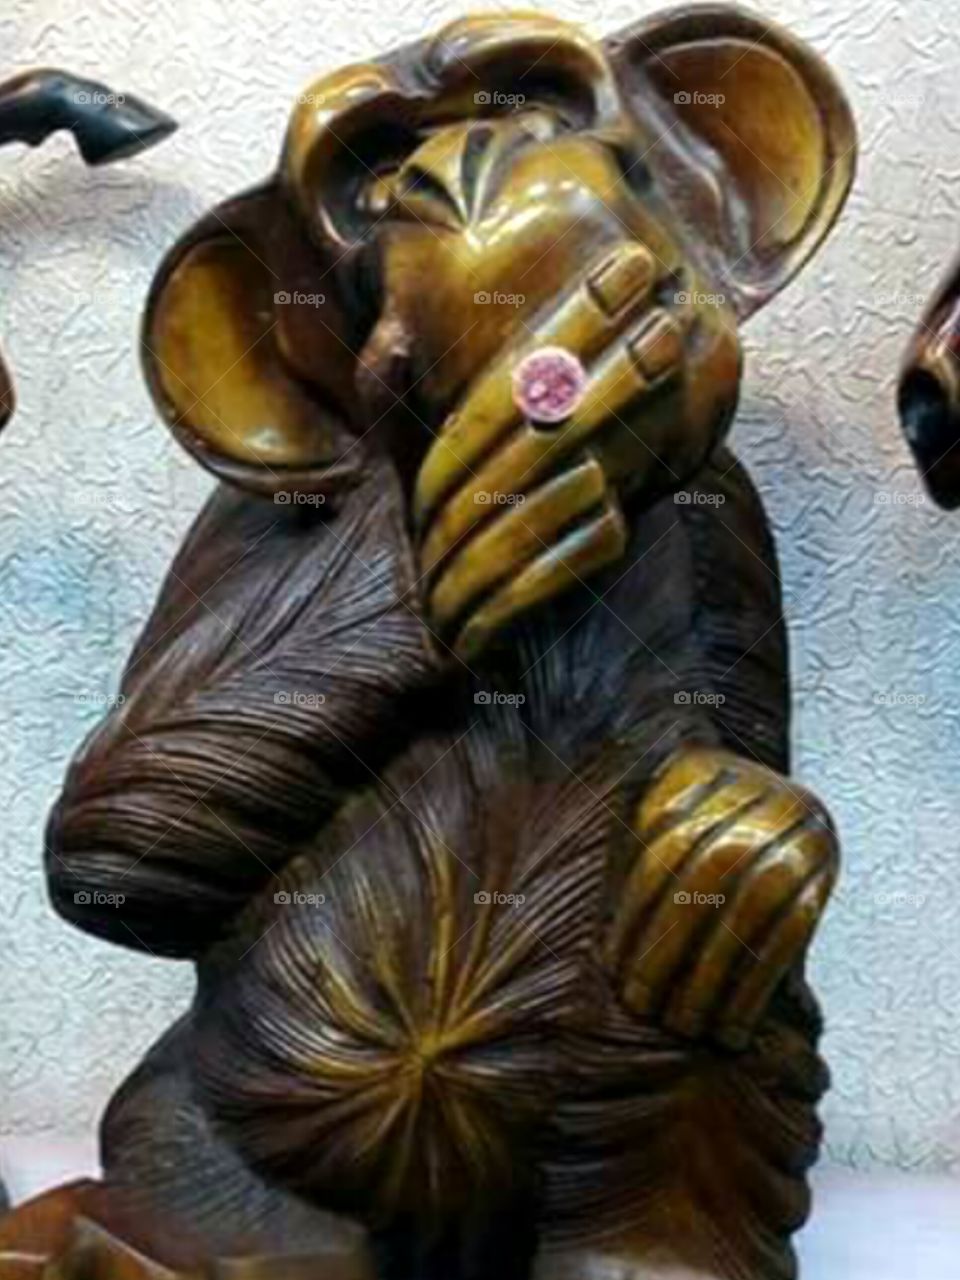 Hande Made  Monkey Statue from a gallery in Alex Egypt